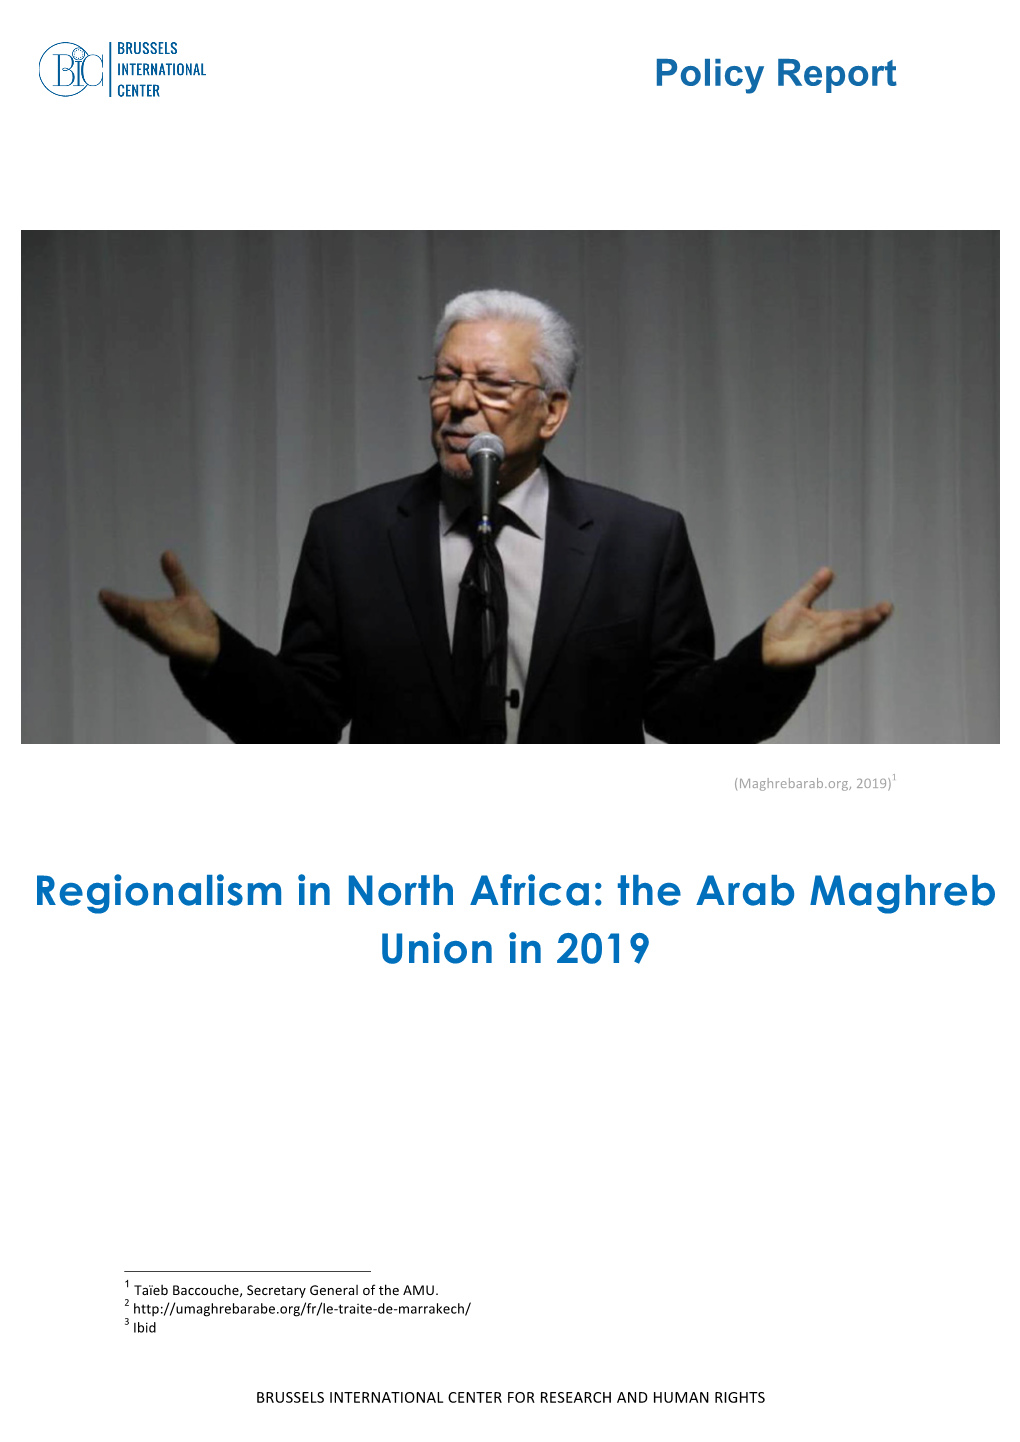 Regionalism in North Africa: the Arab Maghreb Union in 2019